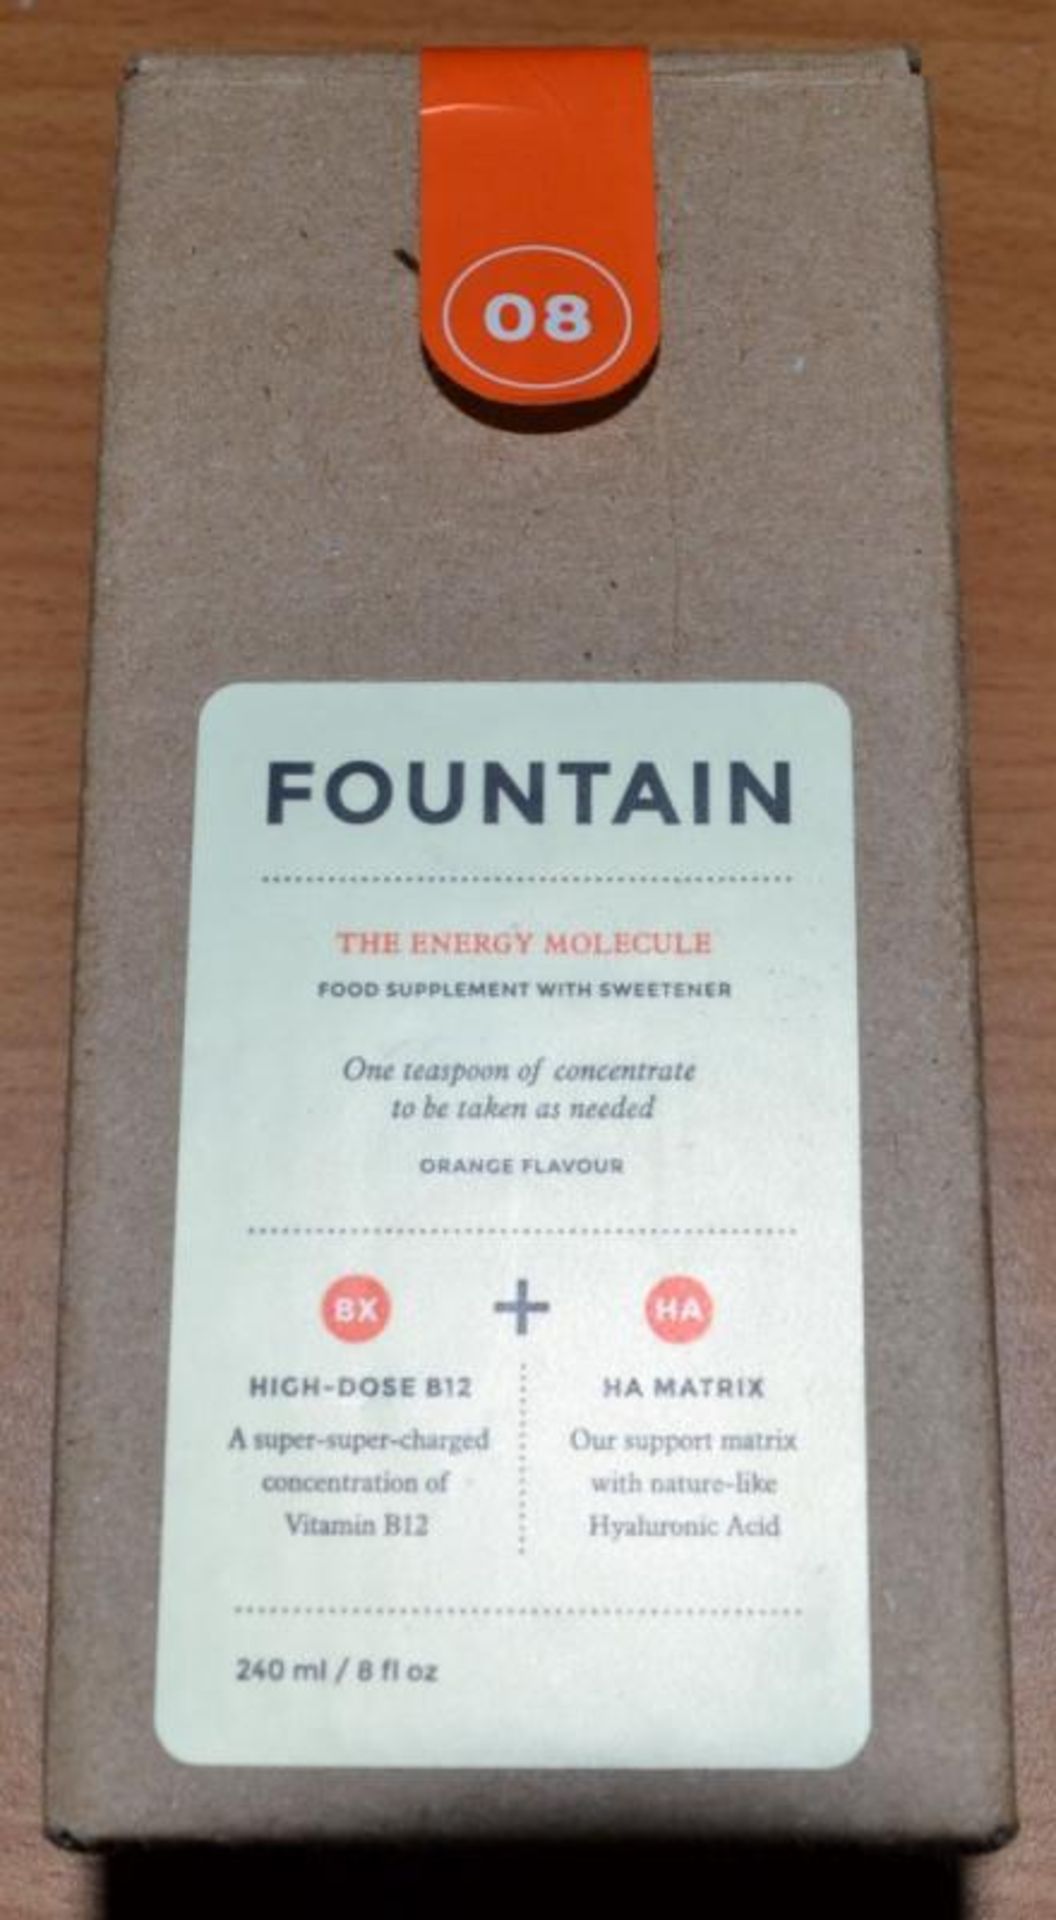 10 x 240ml Bottles of Fountain, The Energy Molecule Supplement - New & Boxed - CL185 - Ref: - Image 5 of 7